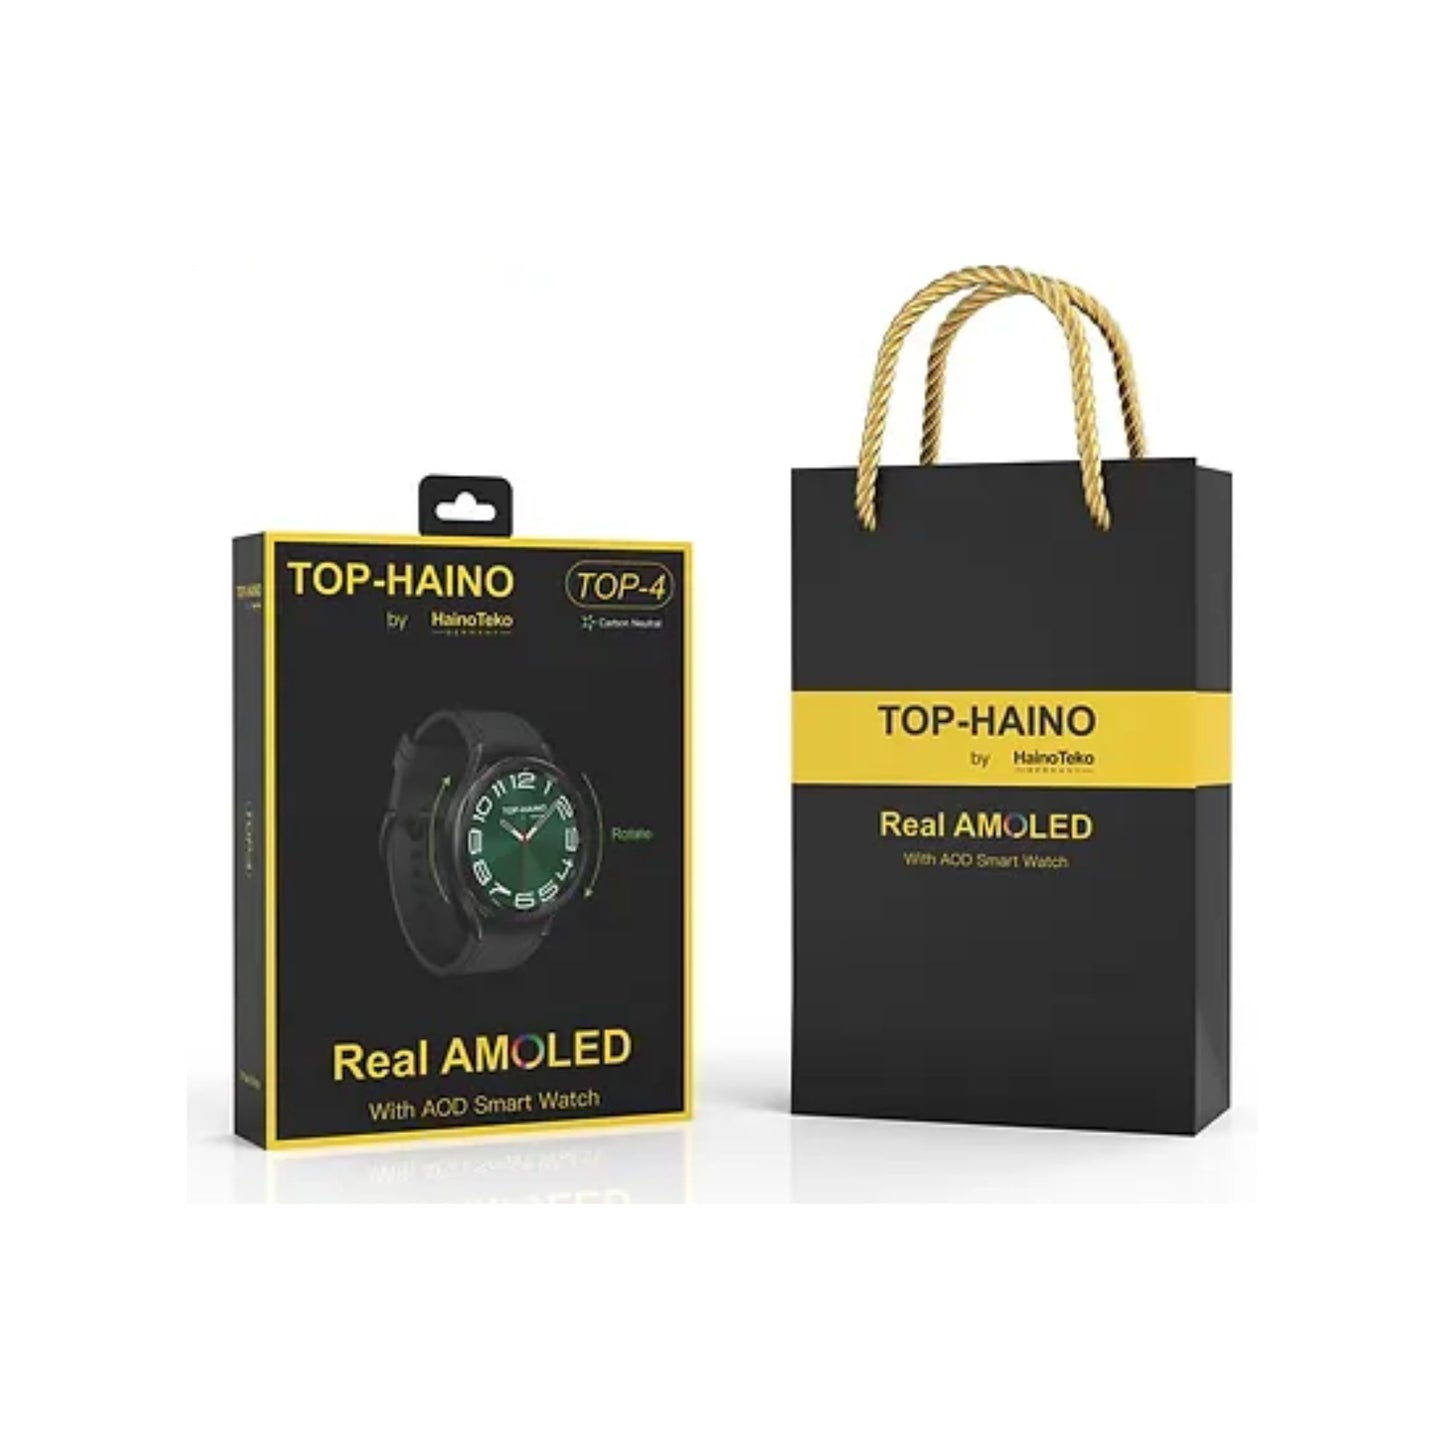 Premium Haino Teko Germany TOP 4 Real AMOLED with Always on Display Smart Watch with 3 Straps and pen